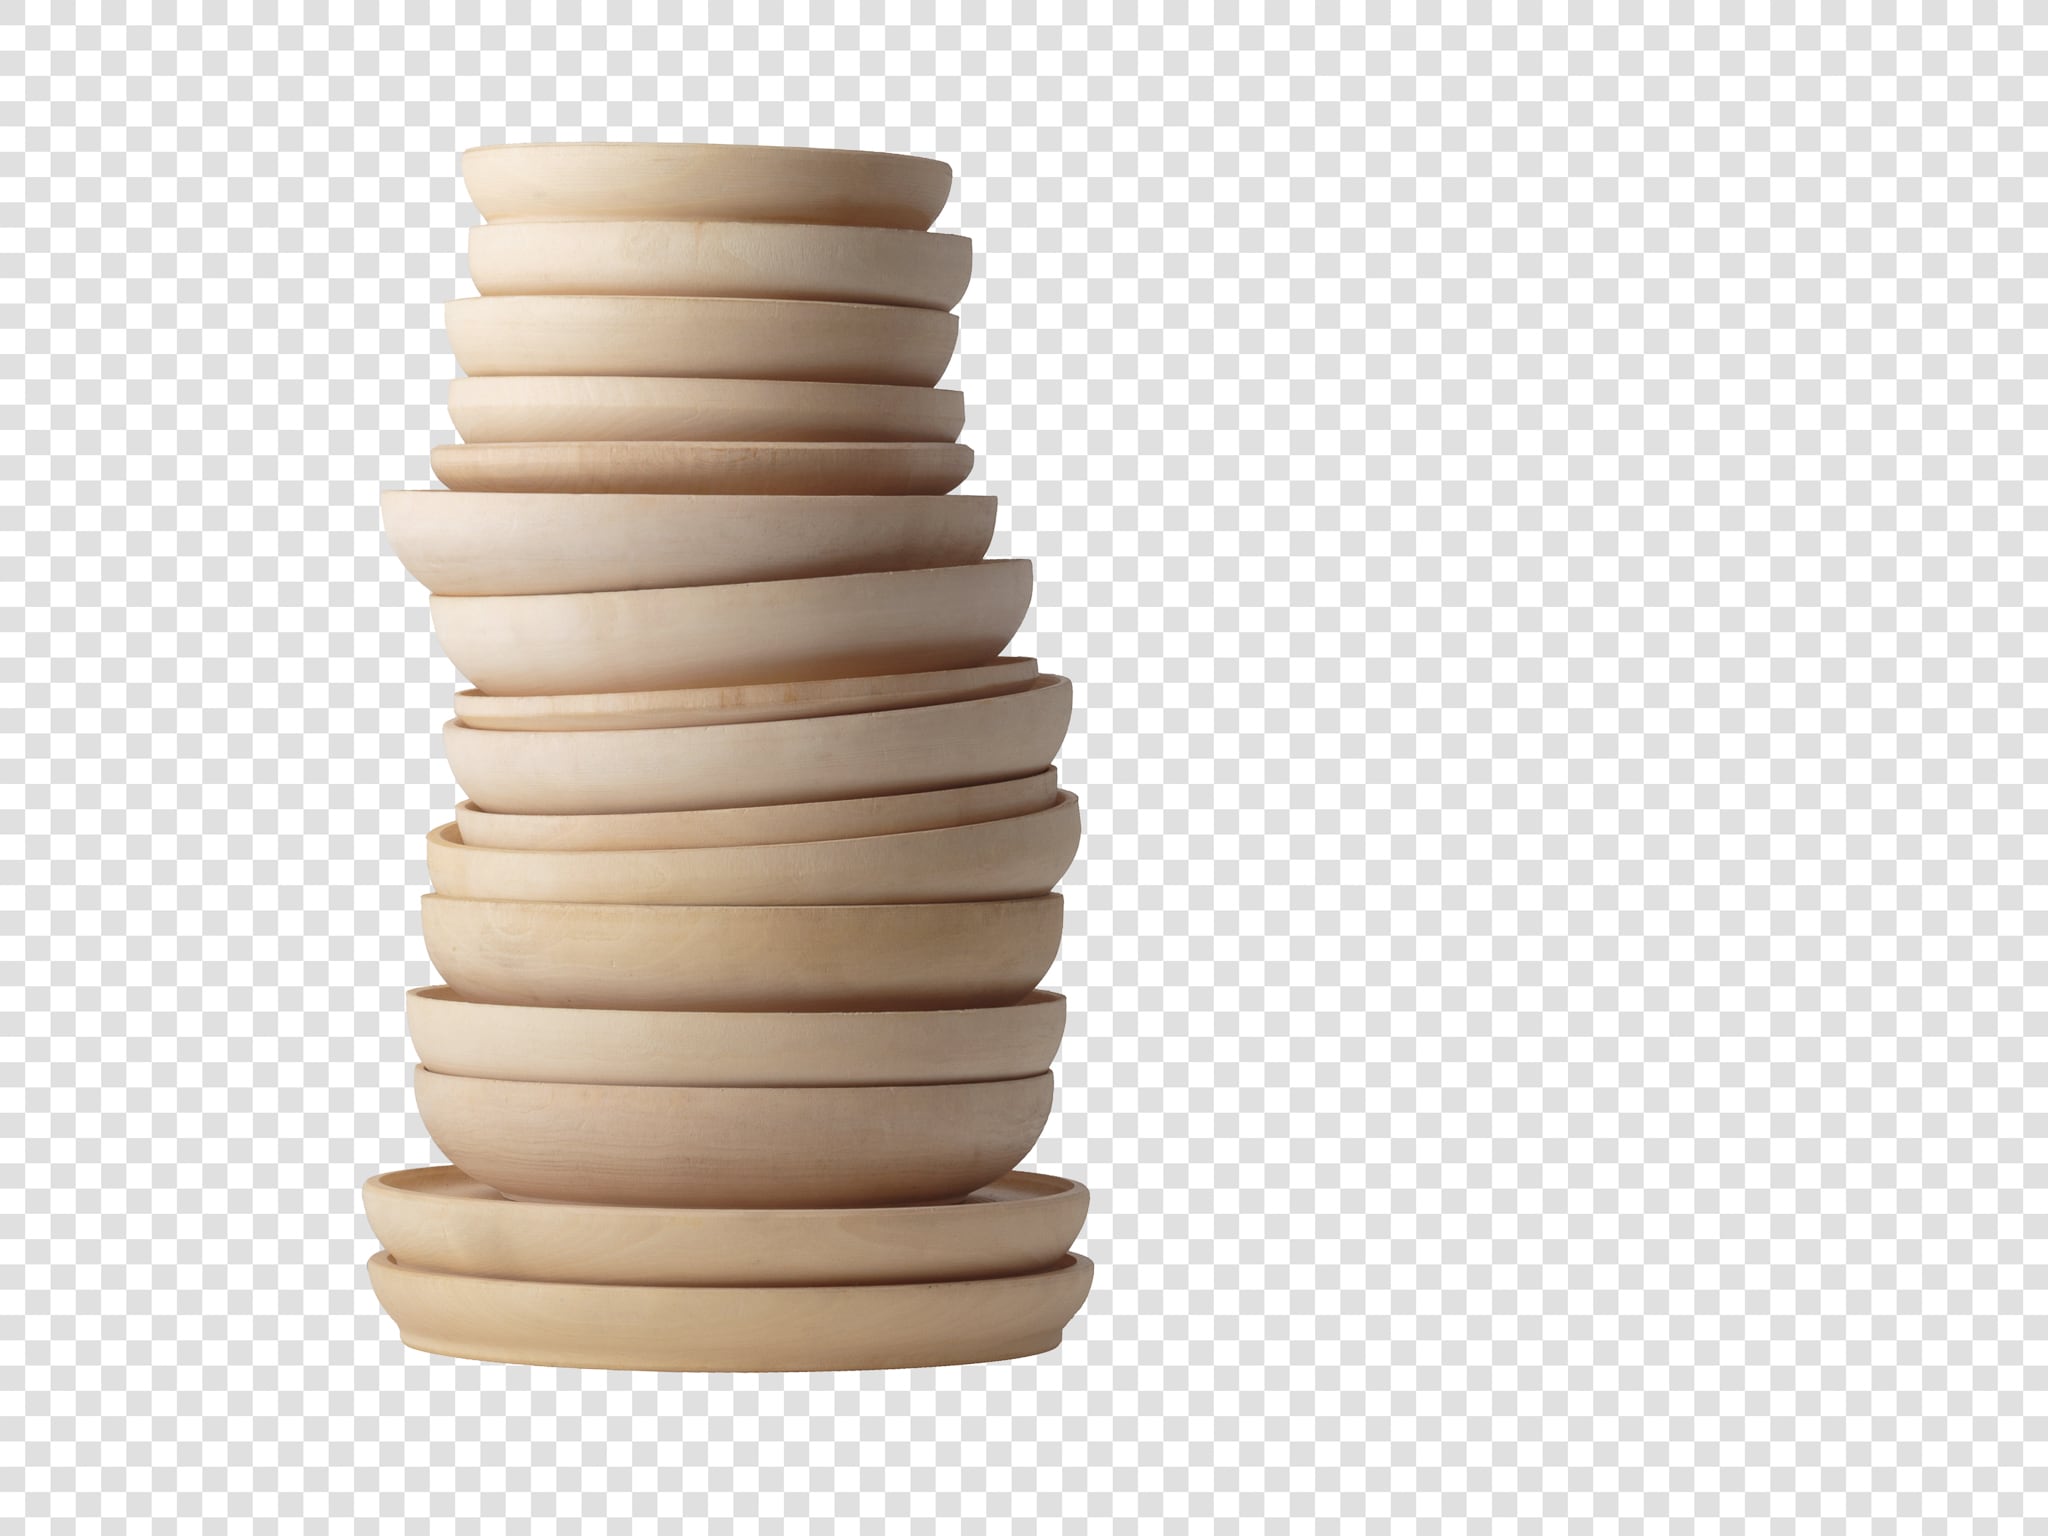 Craft image with transparent background